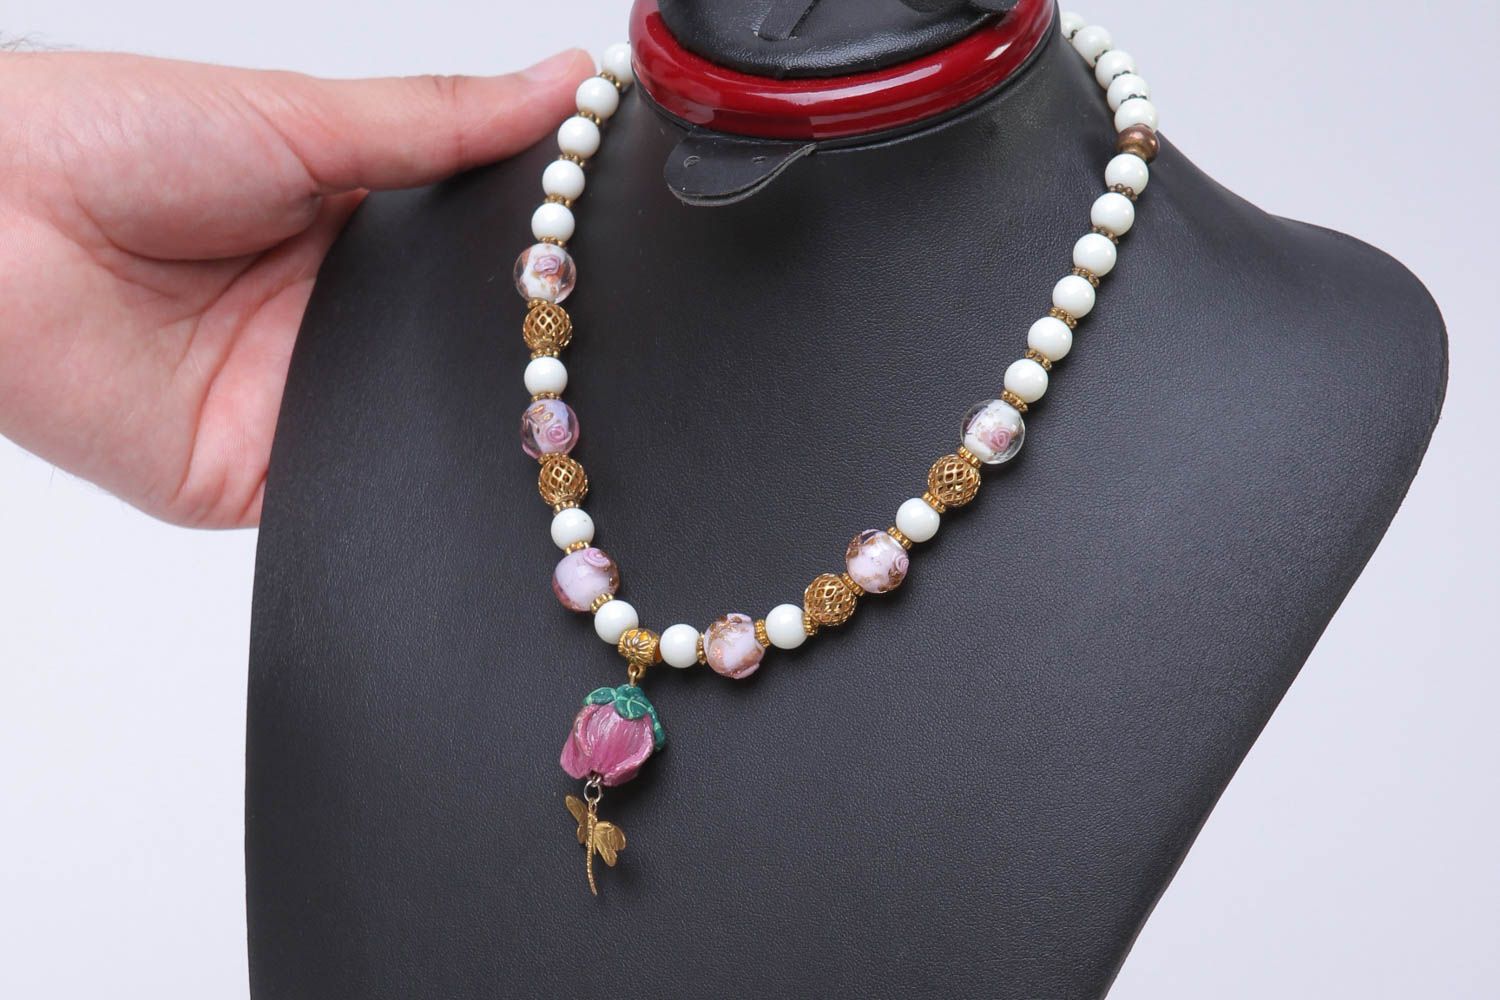 Fashion necklace handmade jewelry necklace long necklace best gifts for women photo 4